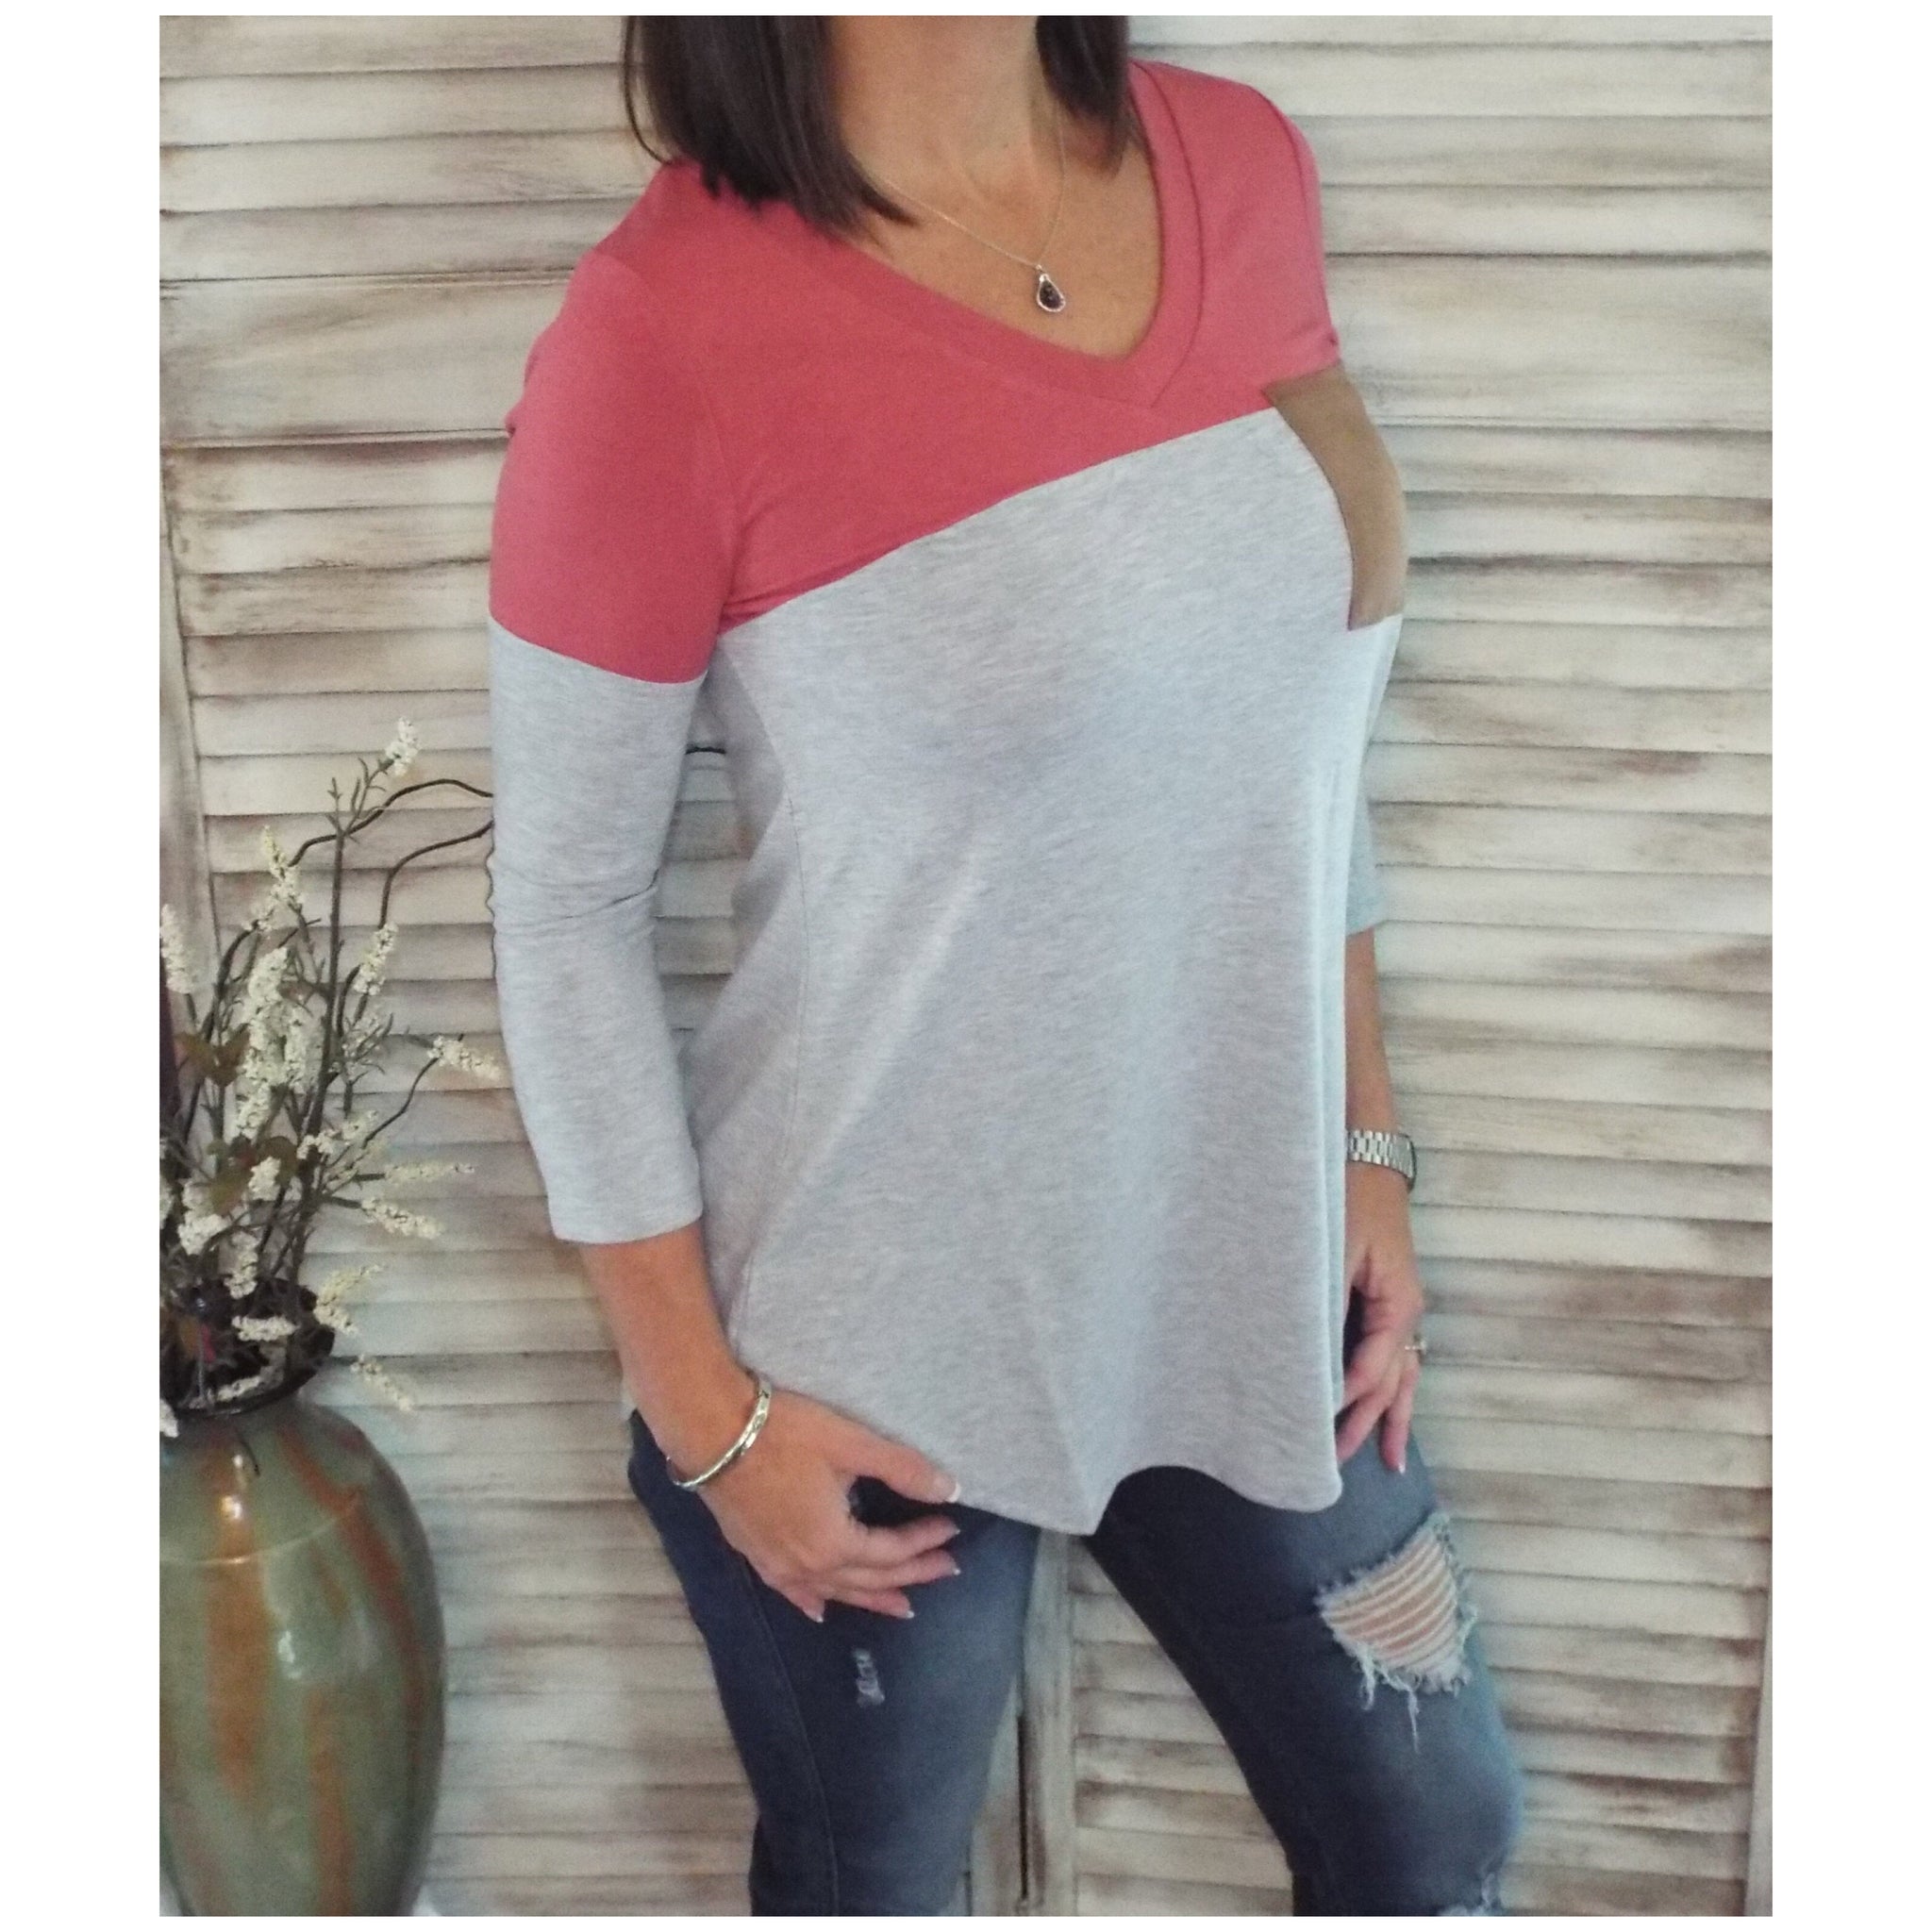 Suede Pocket Elbow Detail V-Neck Floaty Tunic 3/4 Sleeve Pink Gray S/M/L/XL